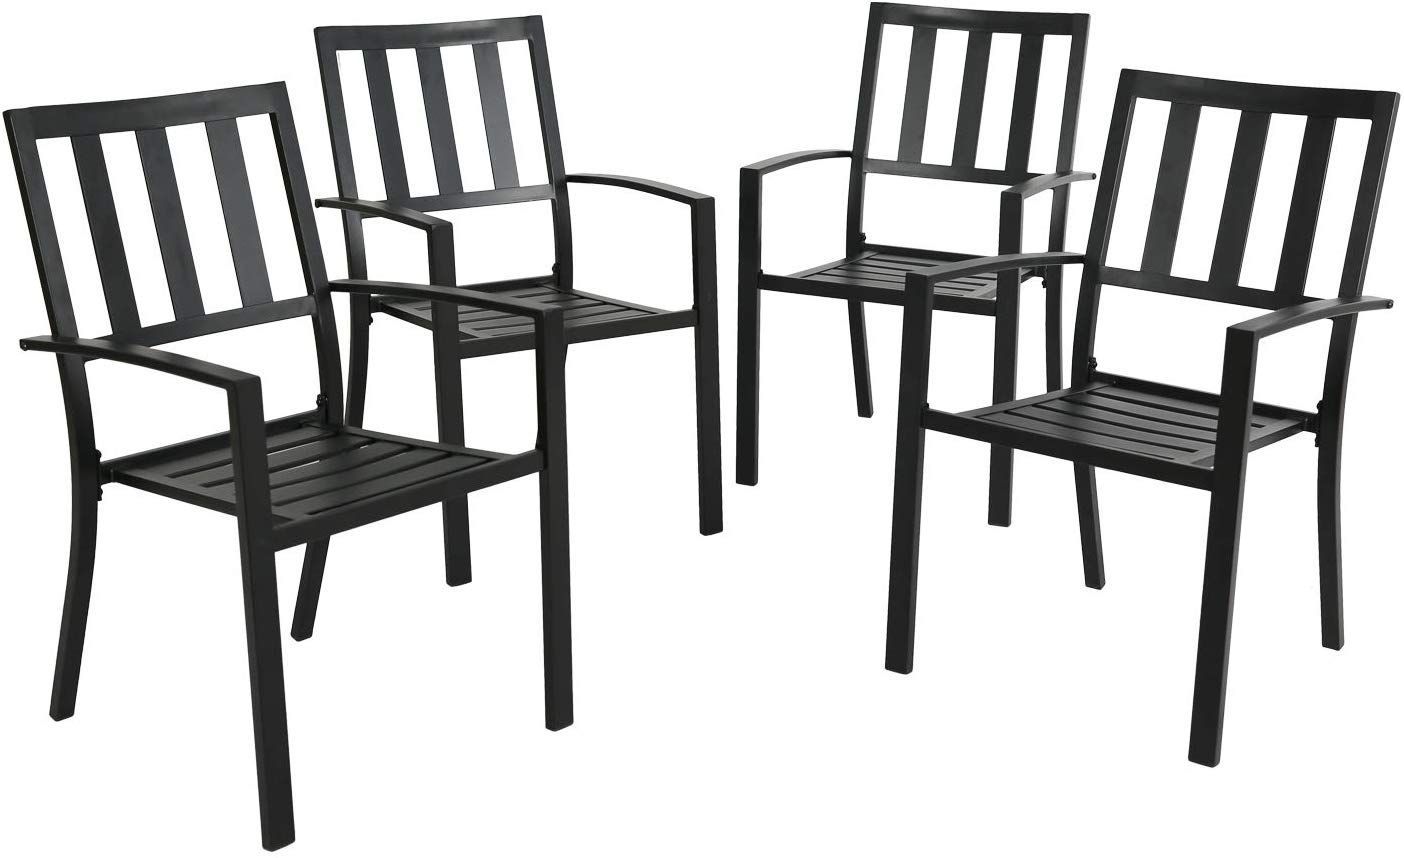 Ulax Furniture Outdoor Patio Dining Arm Chairs Steel Slat Within Irwin Blossom Garden Stools (View 18 of 25)